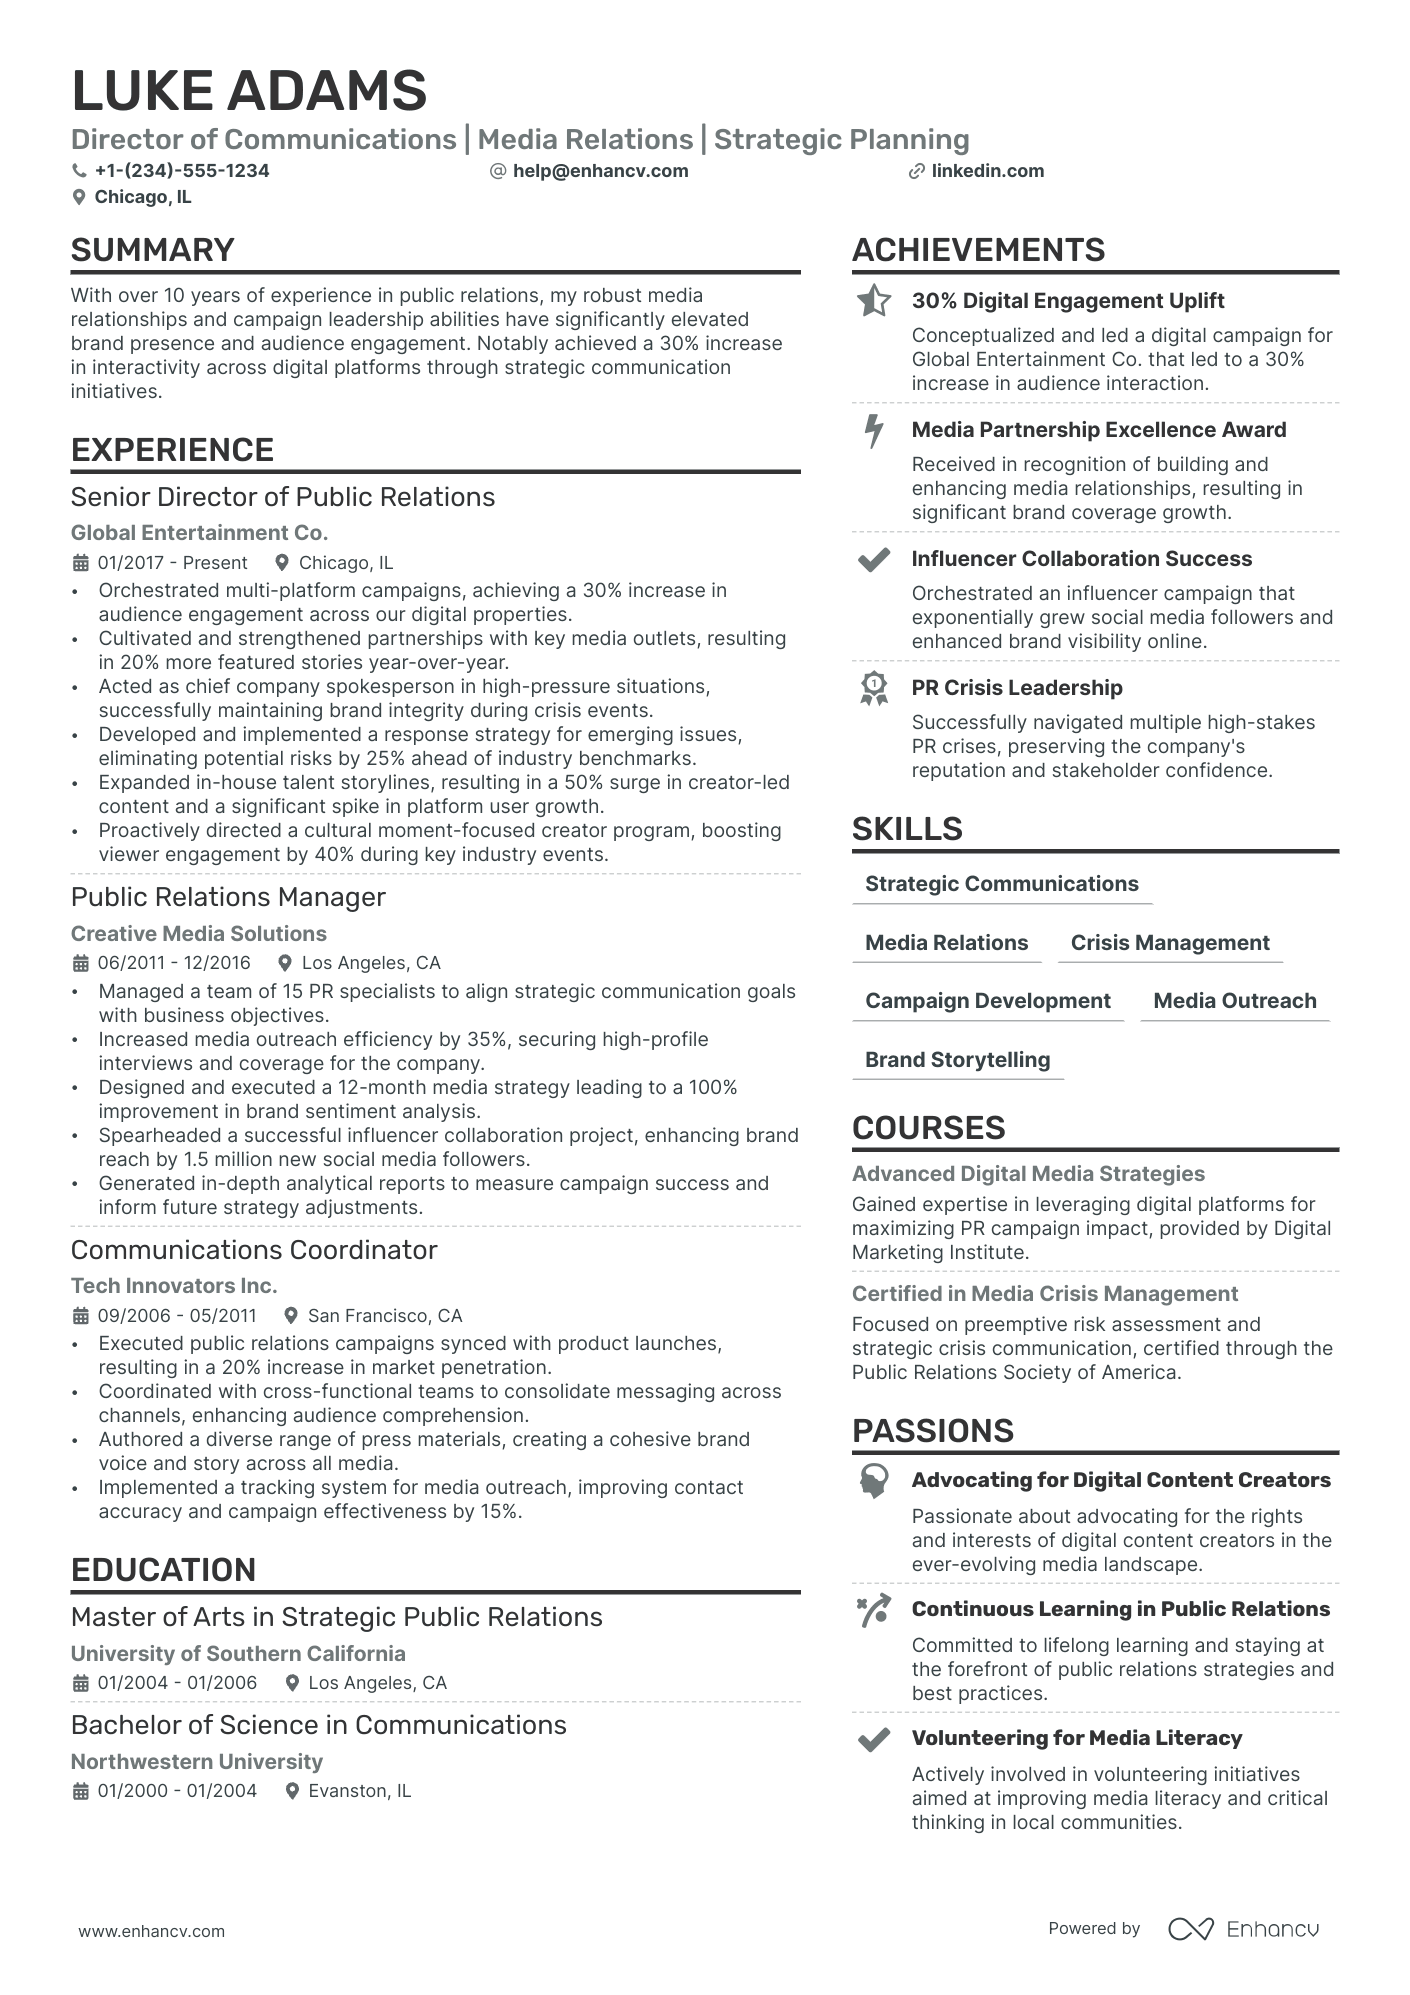 Director of Communications resume example